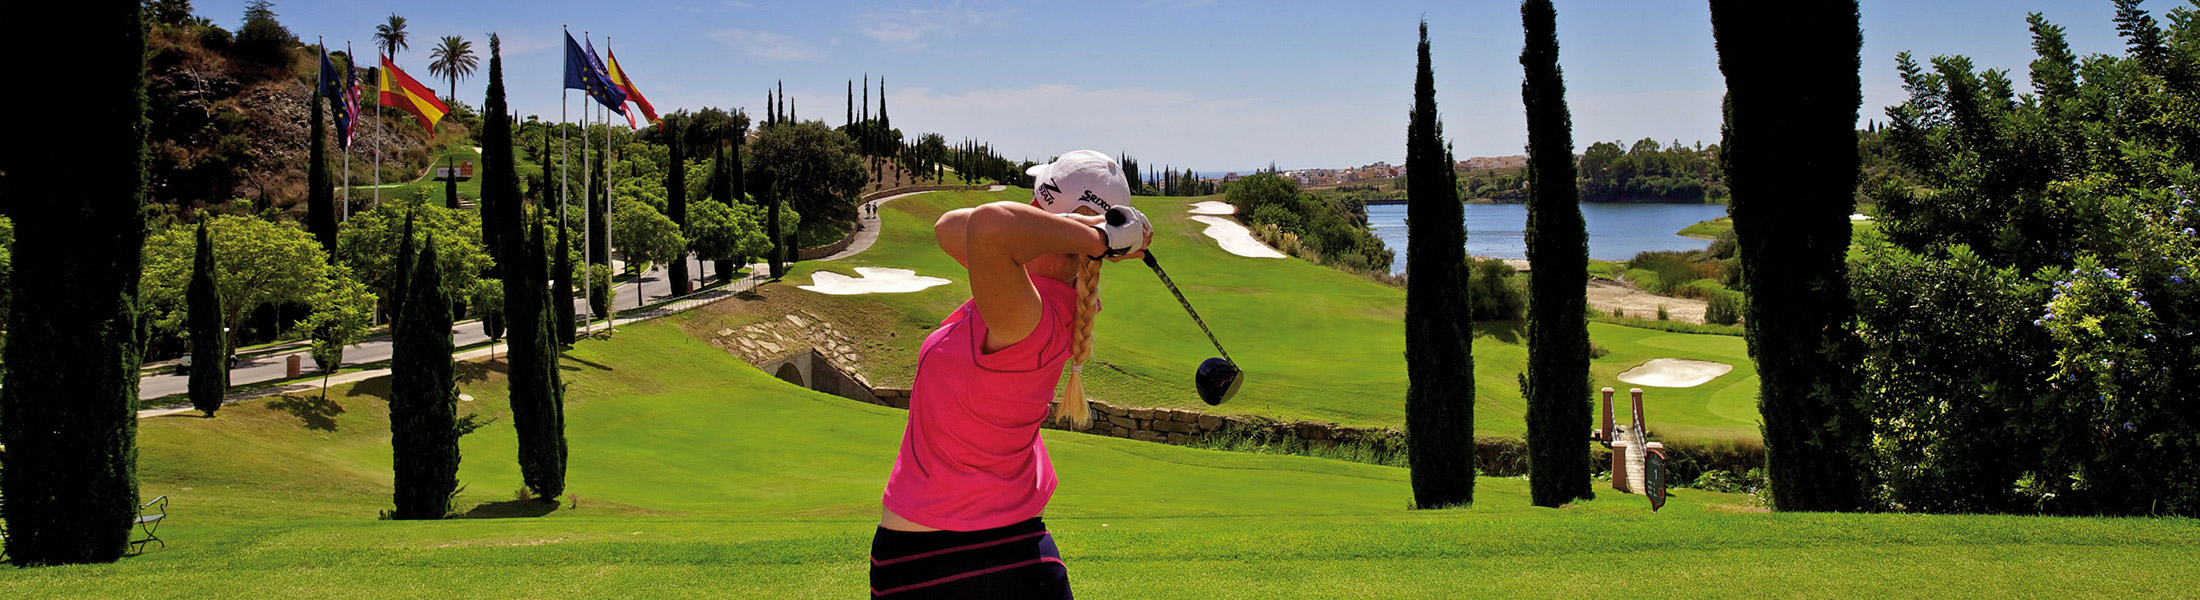 Gaston Golf Tours SL for quality golf holidays in Spain and Portugal